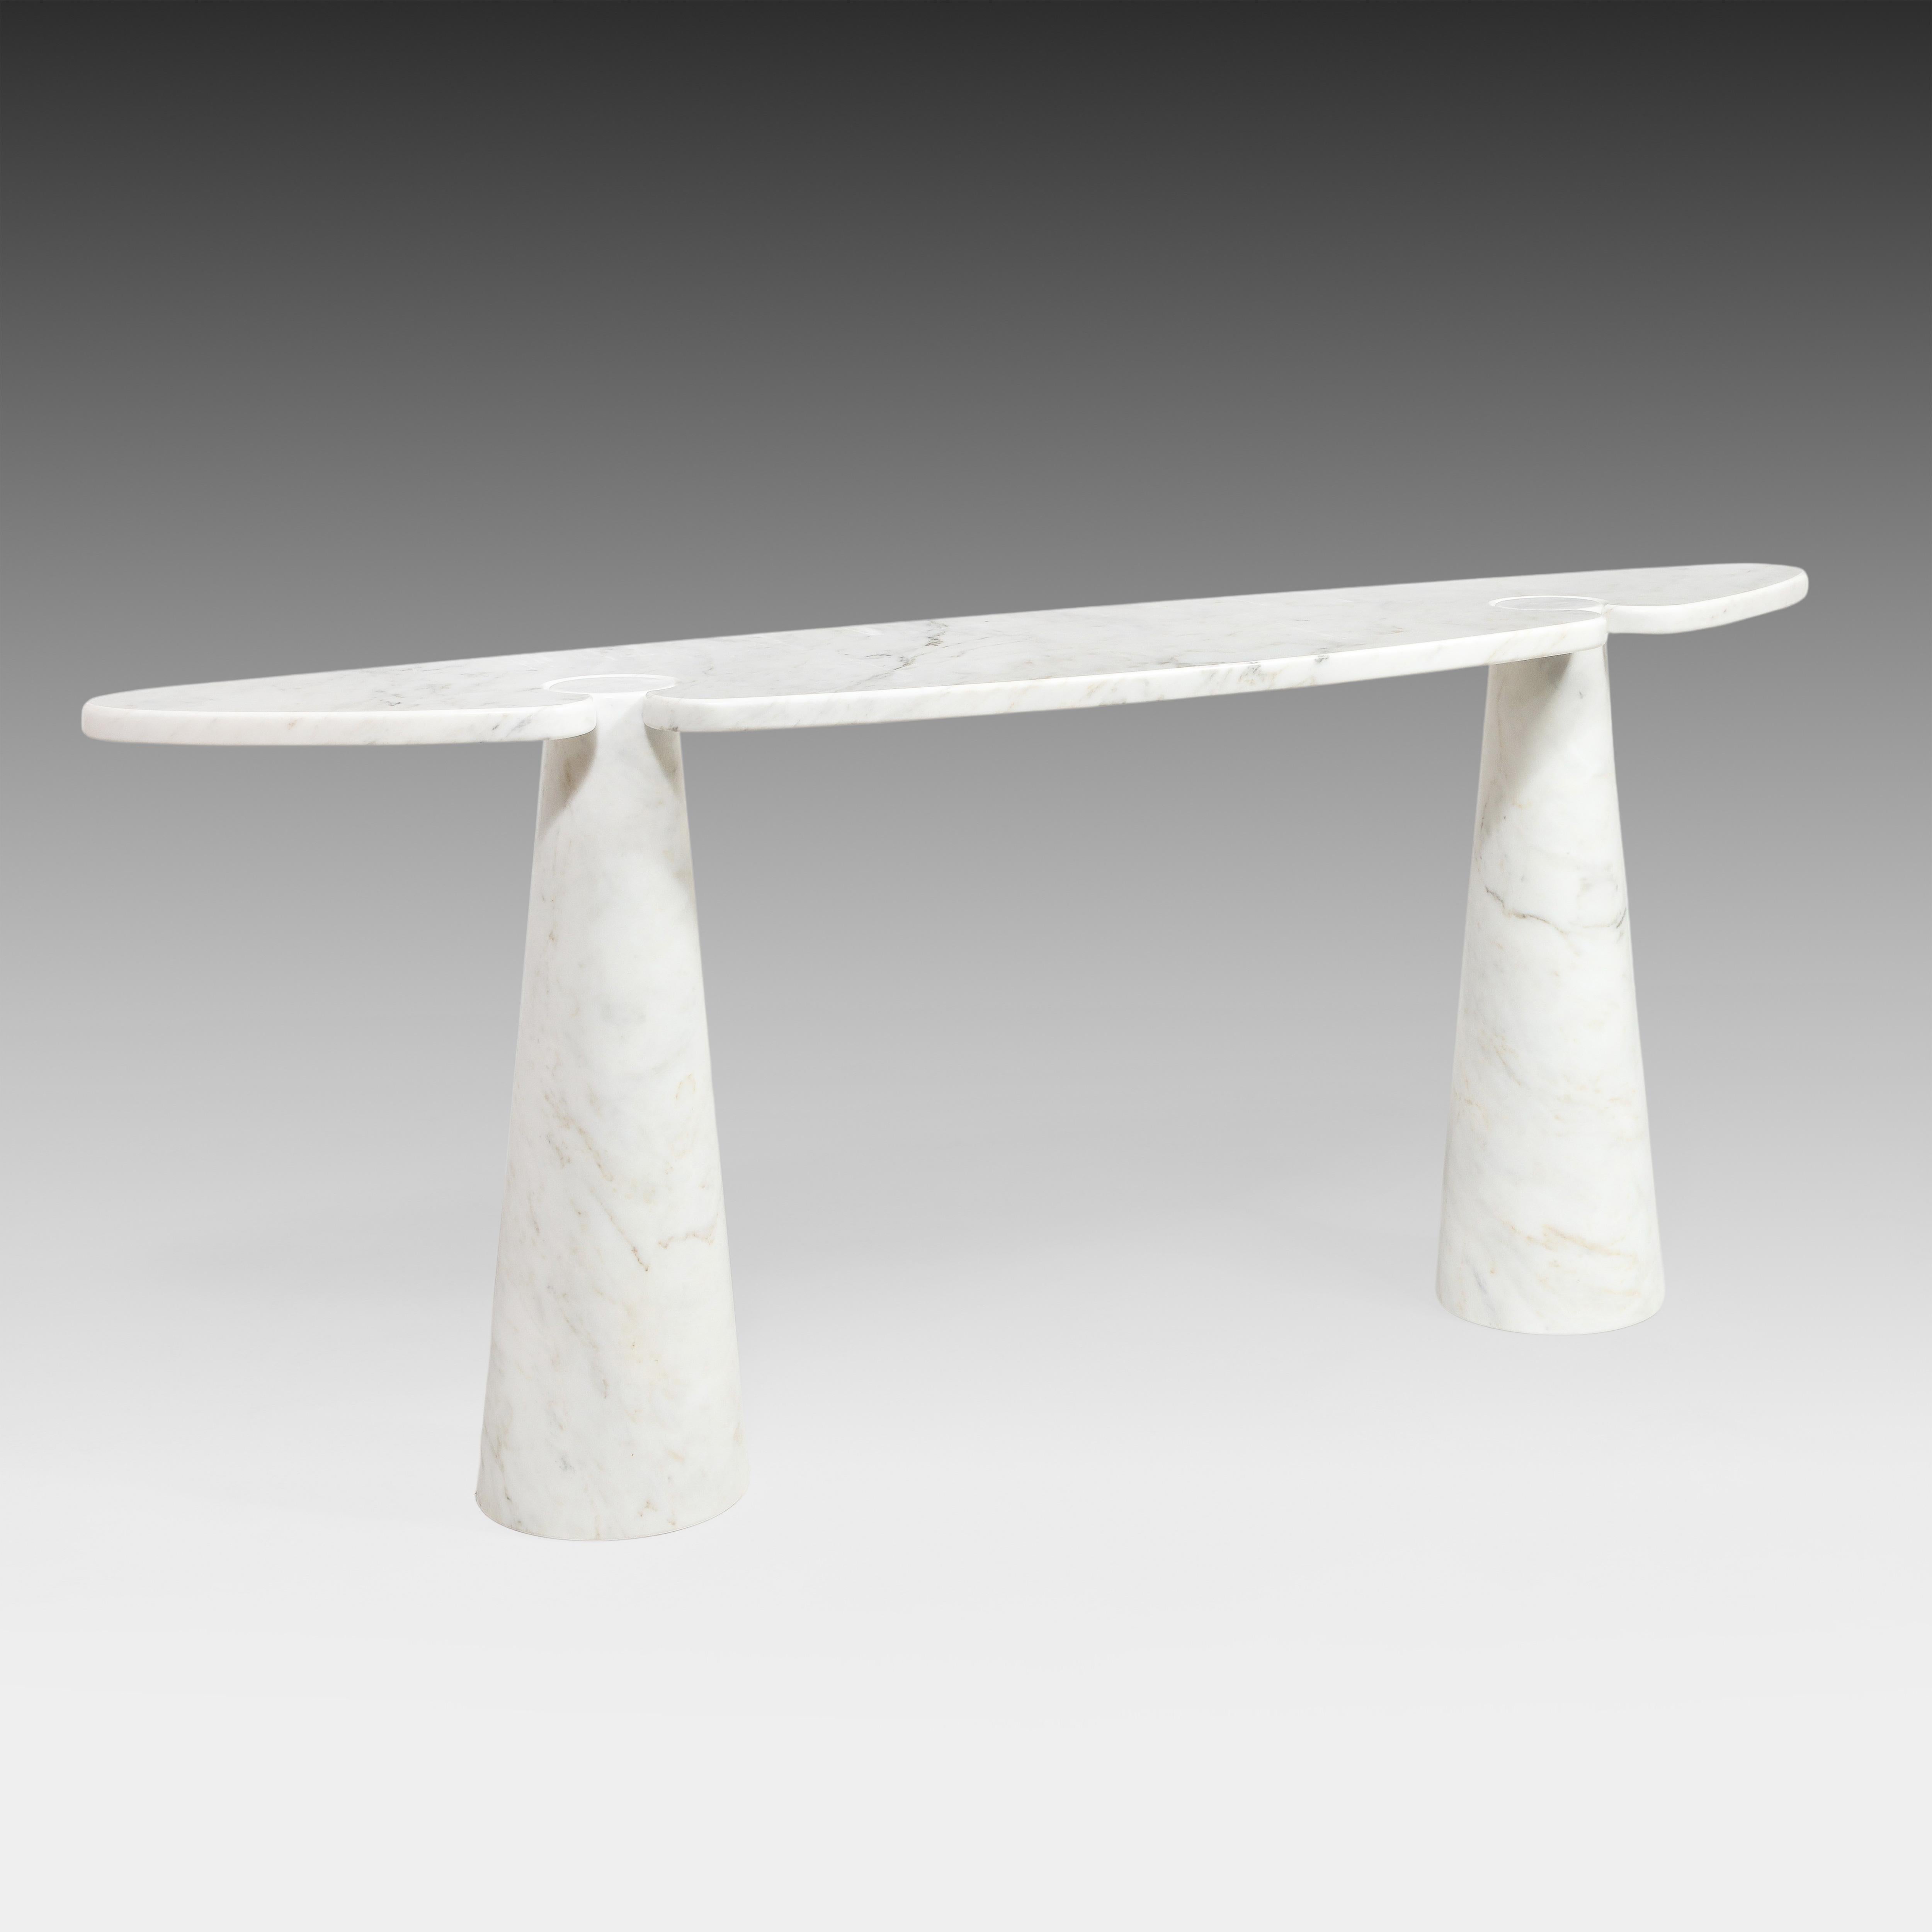 Designed by Angelo Mangiarotti for Skipper from the Eros series, iconic Carrara marble console table with large elliptical top fitted on two conical bases. This elegantly organic console table has beautiful subtle veining throughout. Original